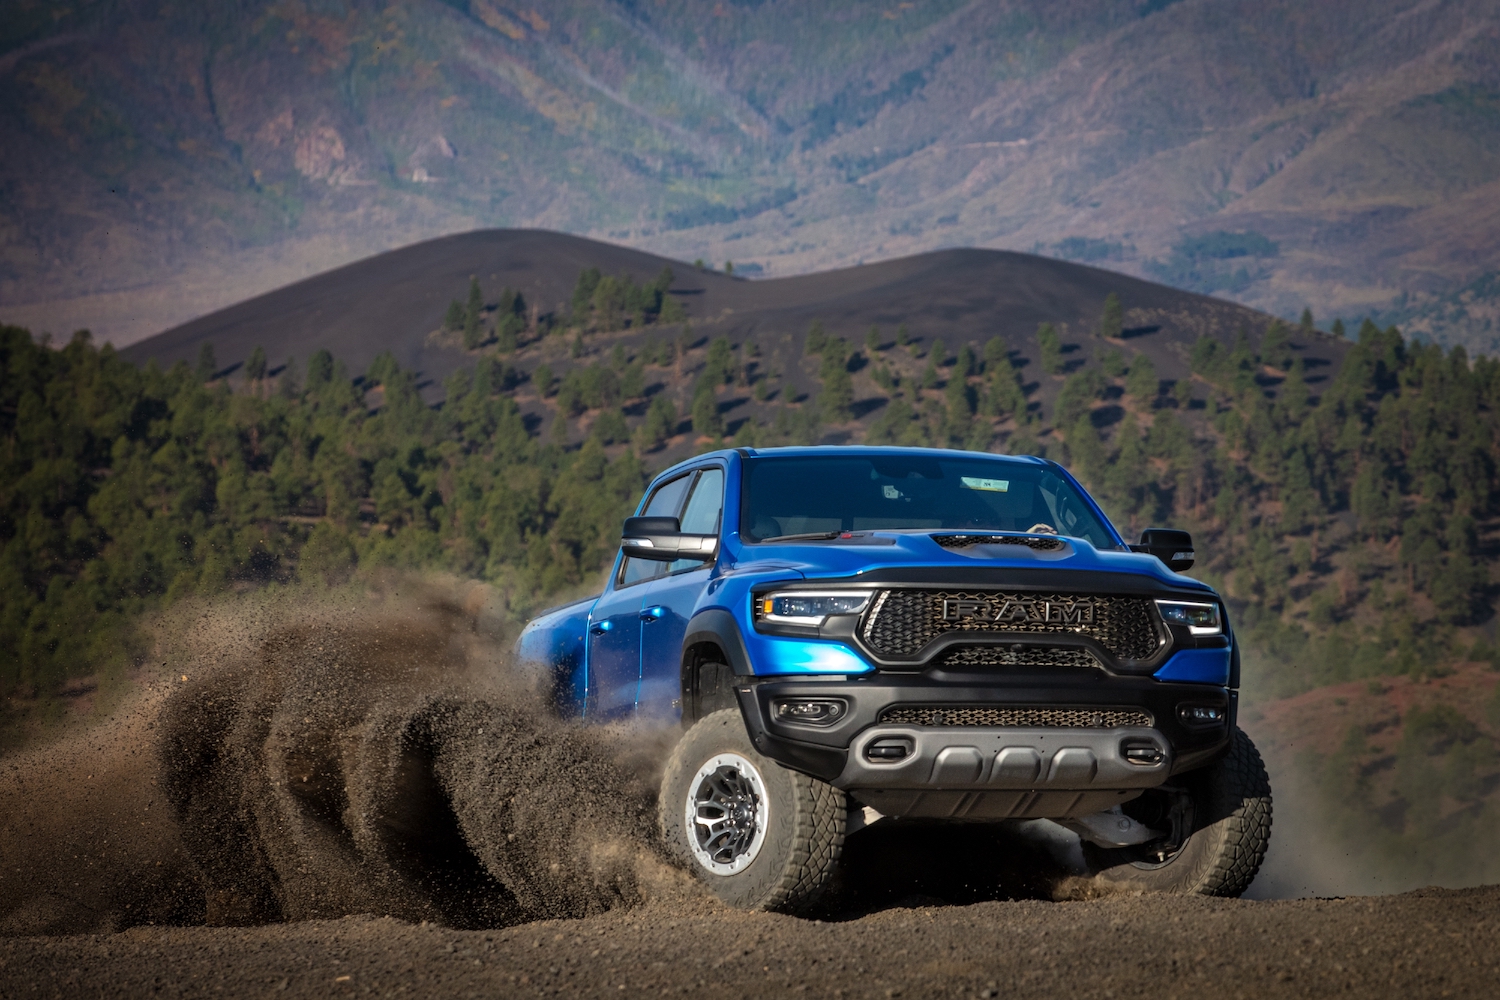 A blue Ram 1500 pickup truck showing off its TRX Hellcat supertruck engine by skidding across the dirt, with wooded hills in the background.